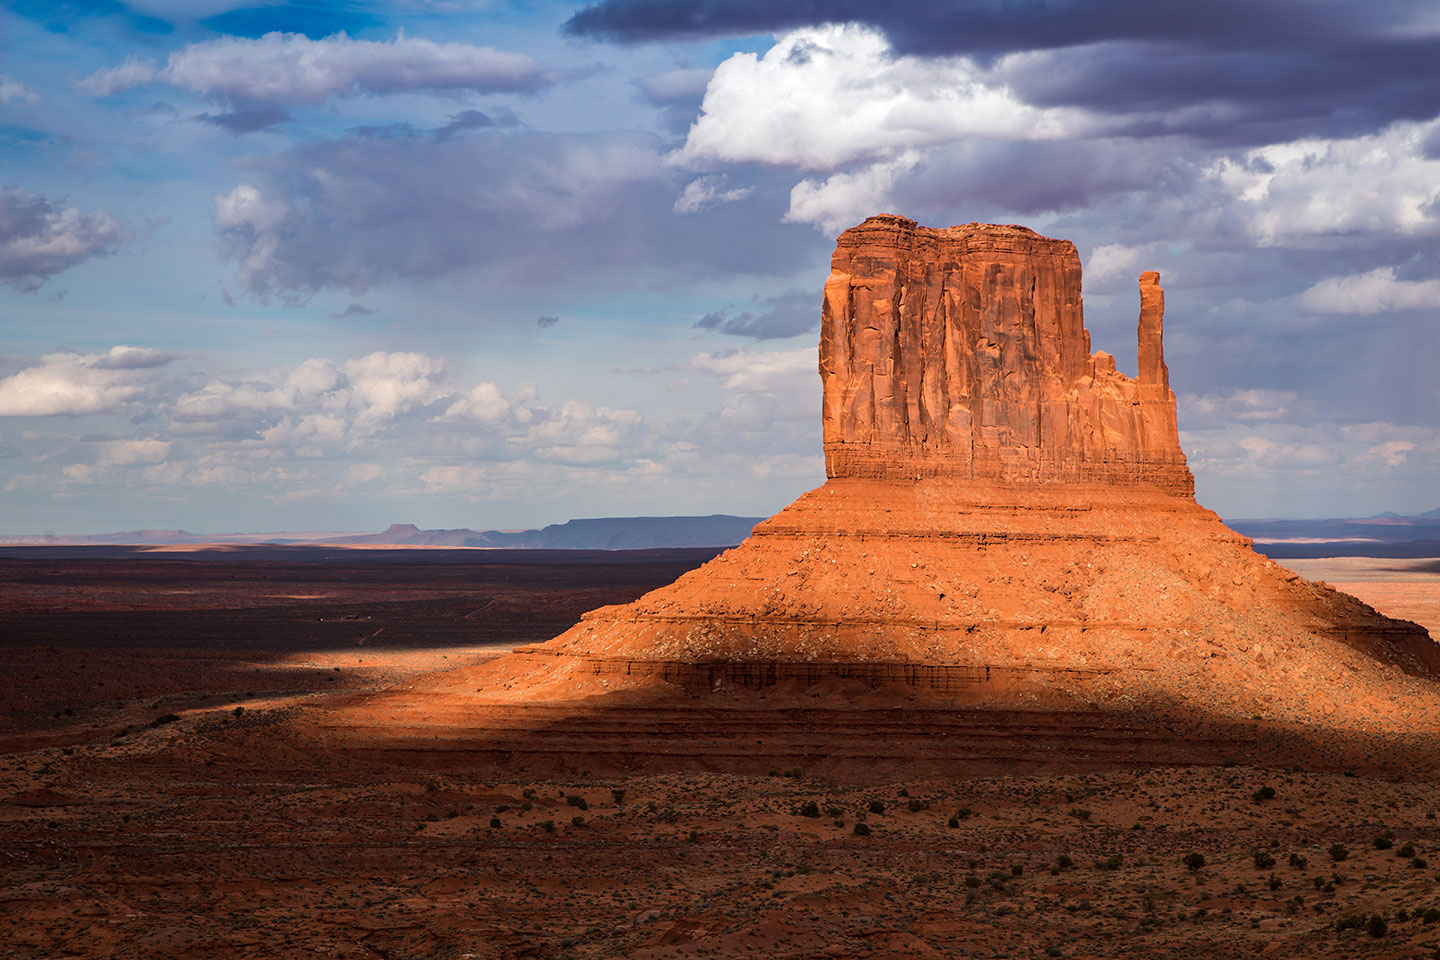 Sunlight hits a butte in Monument Valley, Arizona